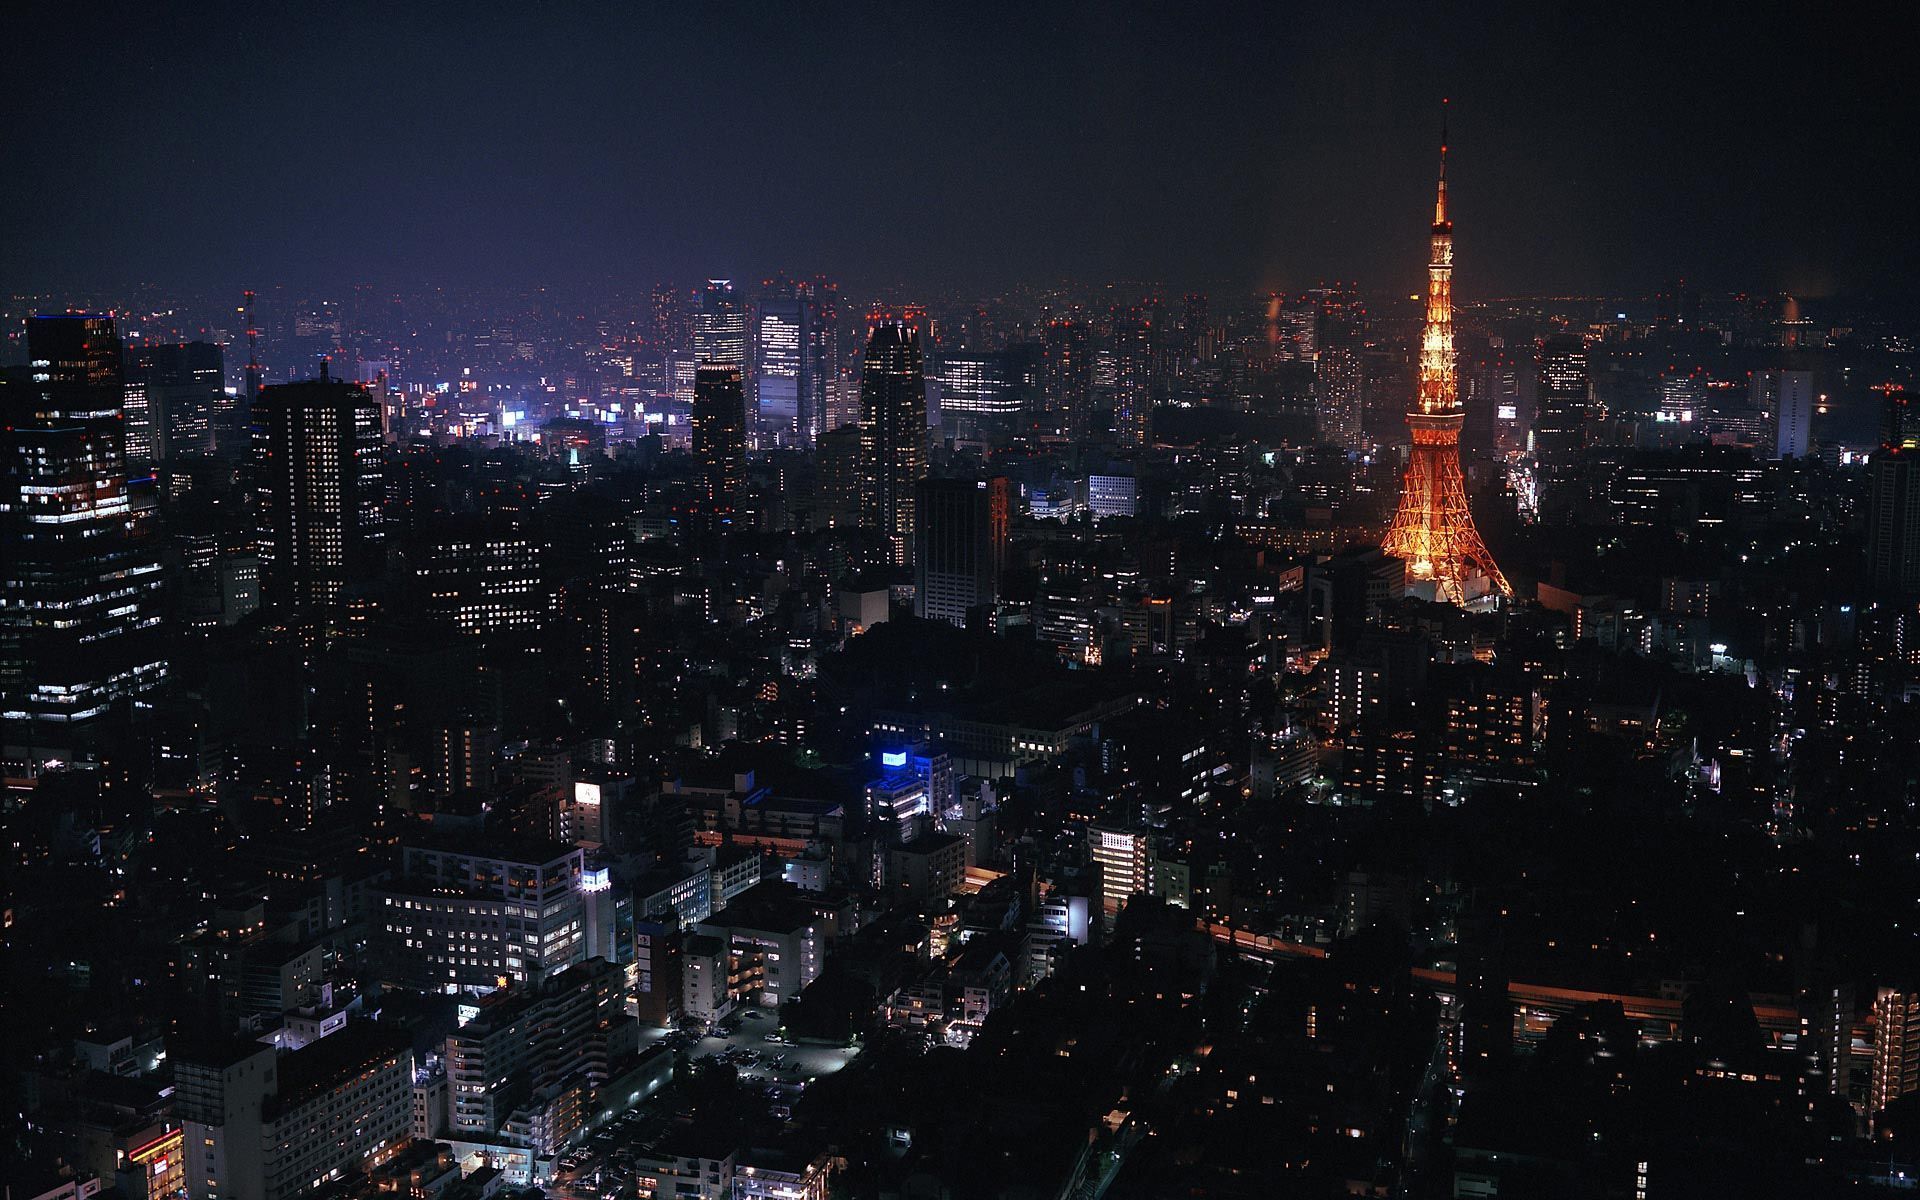 Tokyo at Night wallpapers and images - wallpapers, pictures, photos